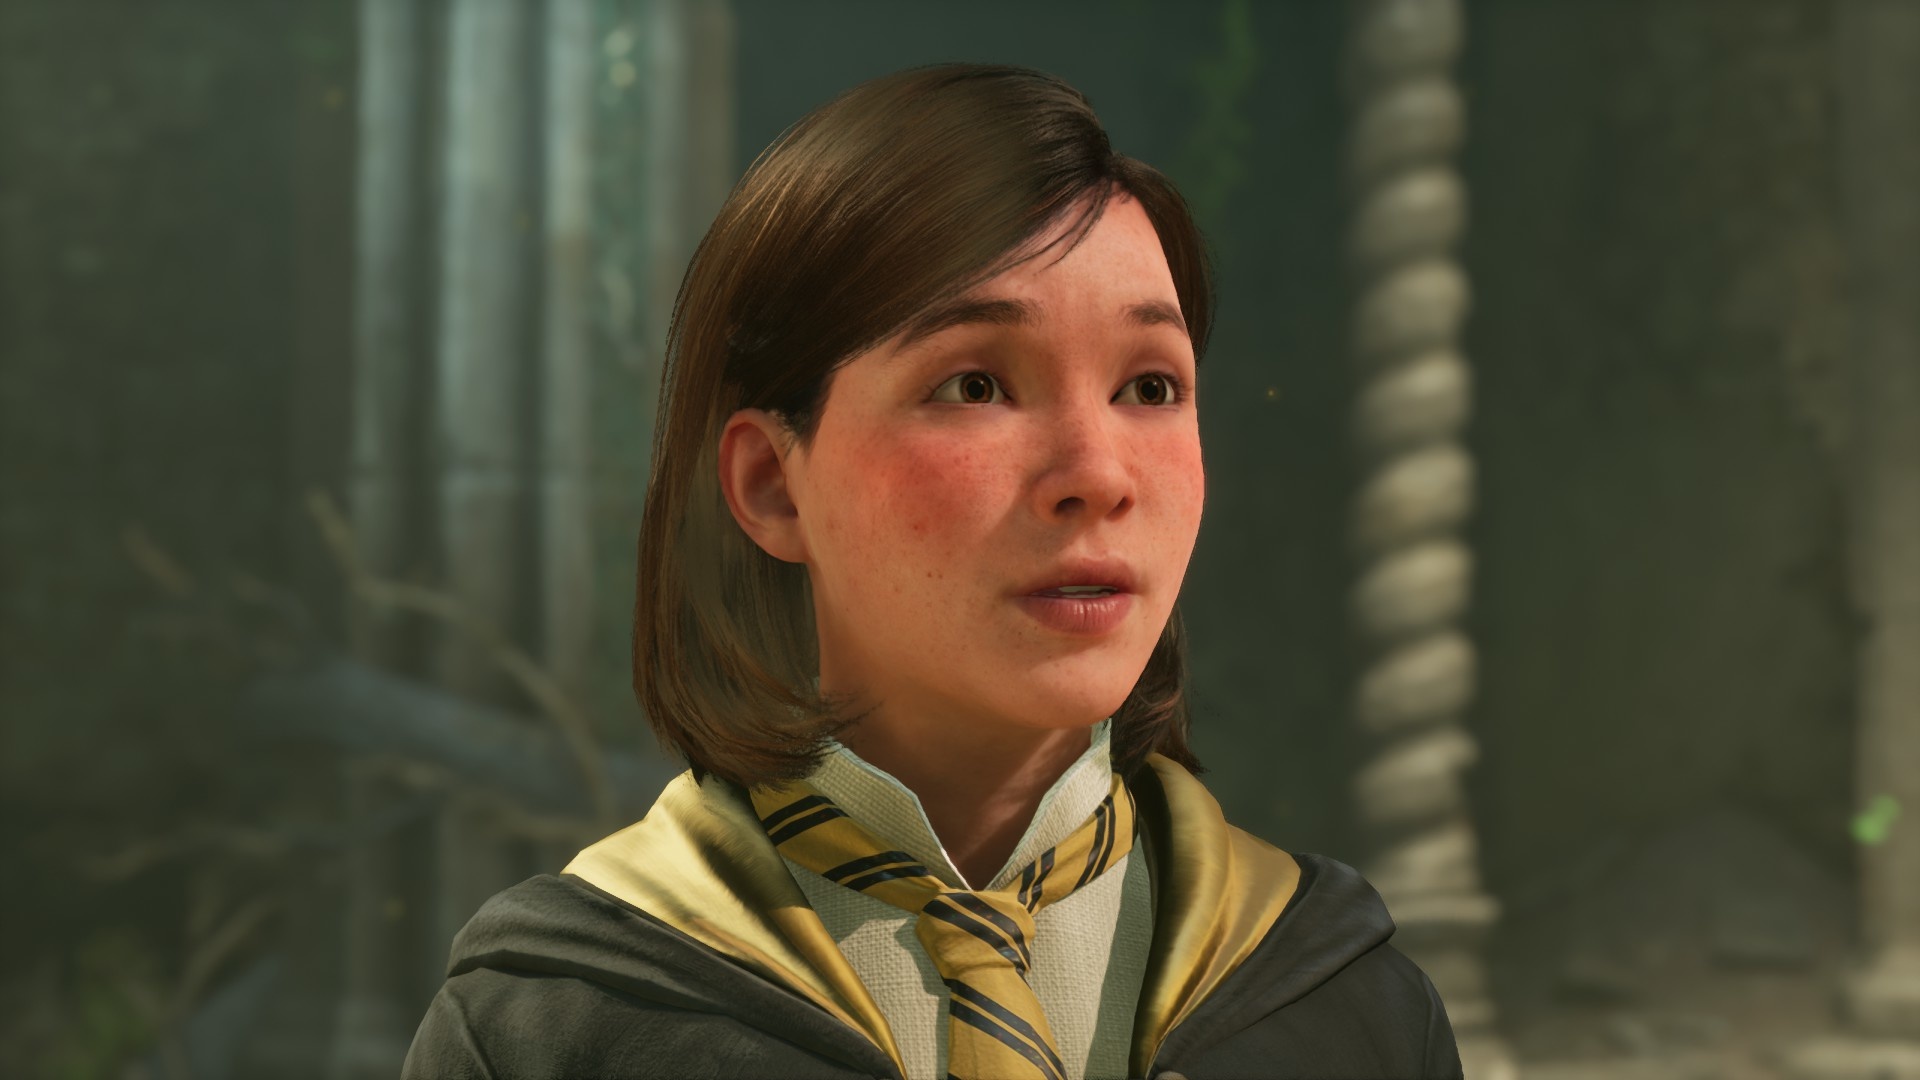 (In Hogwarts Legacy we are sometimes with companions like Poppy. Gloria would prefer to play multiplayer, though)